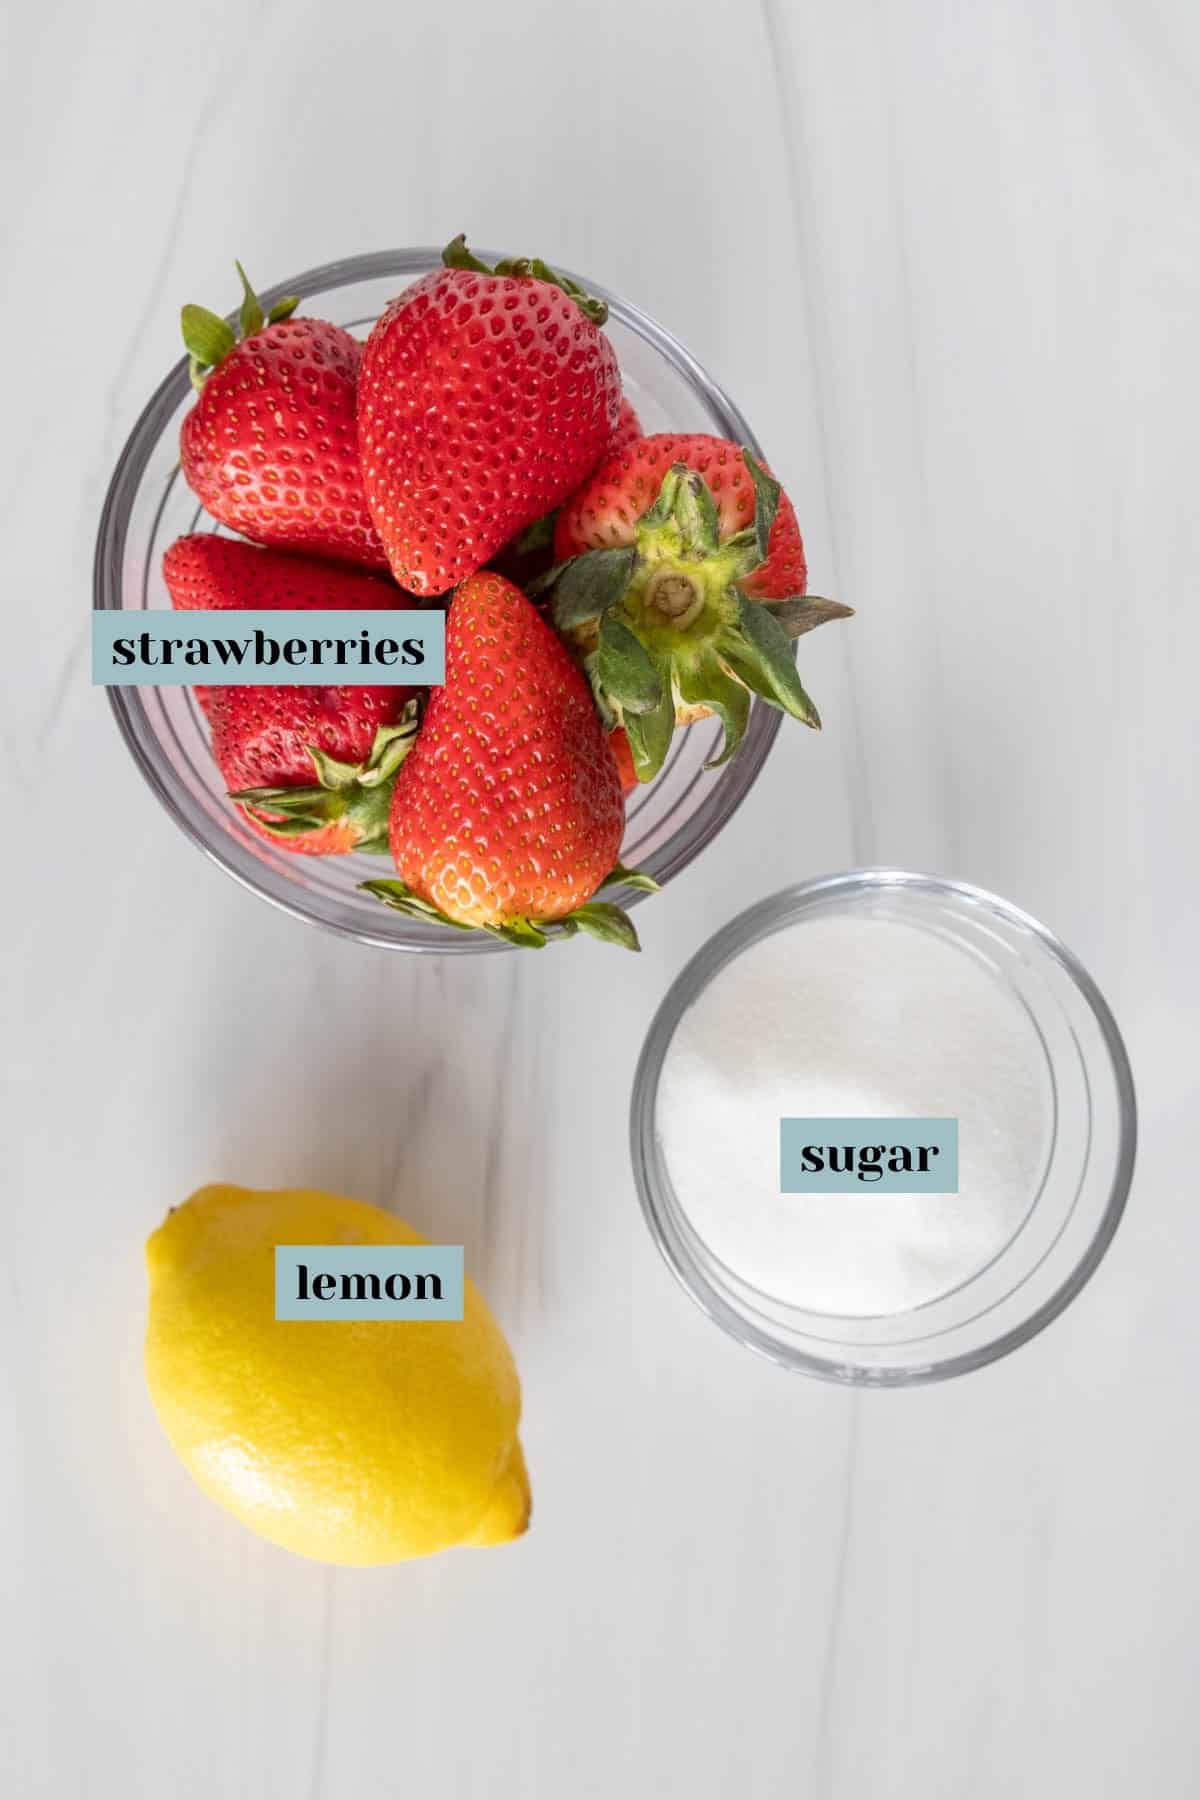 A top-down view of ingredients for a recipe on a white surface: a bowl of strawberries, a lemon to the side, and a smaller bowl of sugar, each labeled.